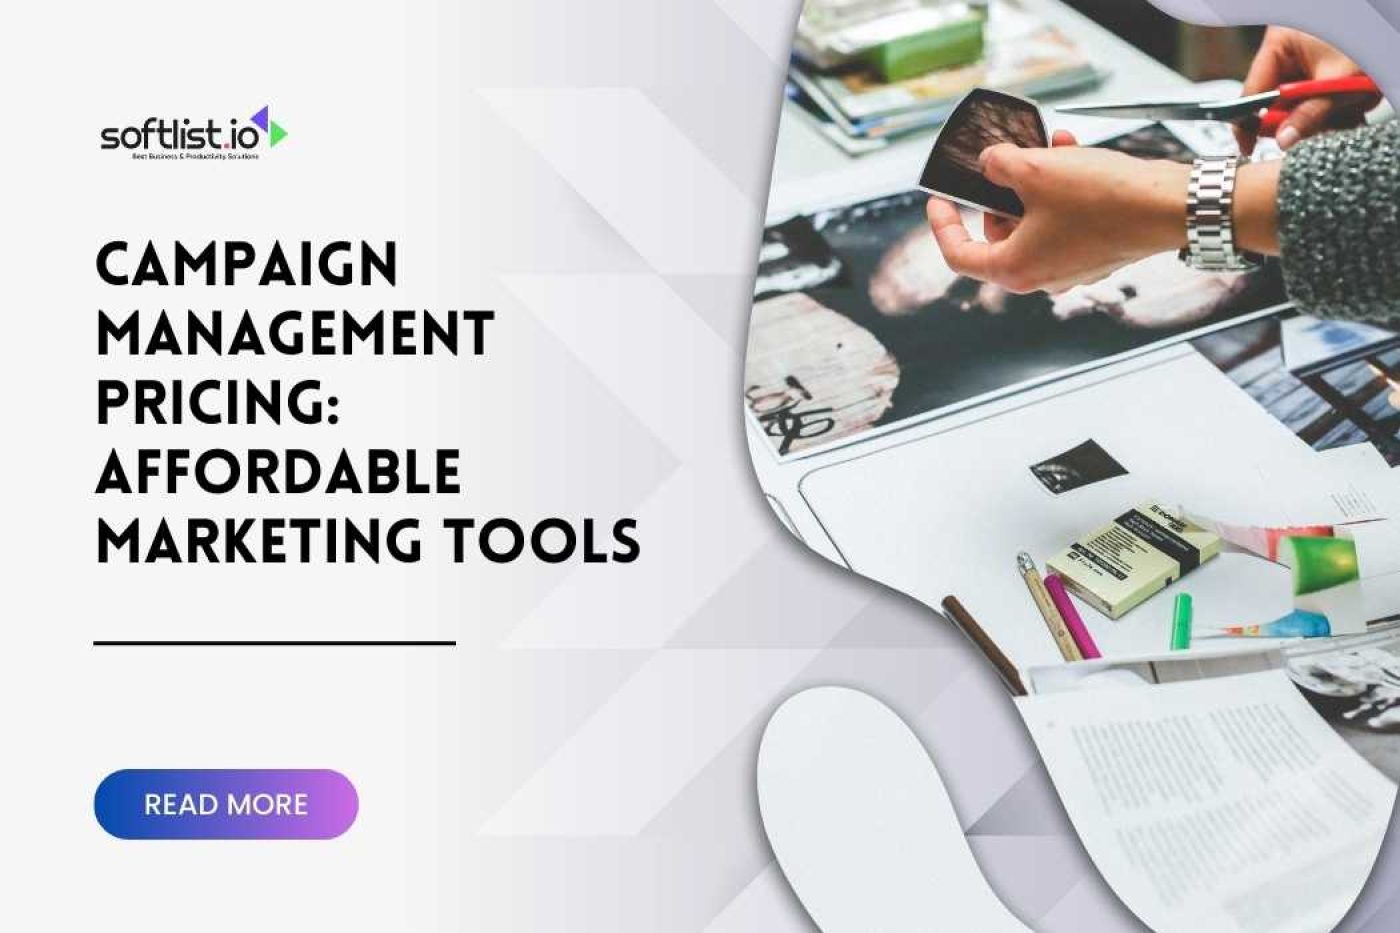 Guide to Marketing Campaign Management Tools & Pricing